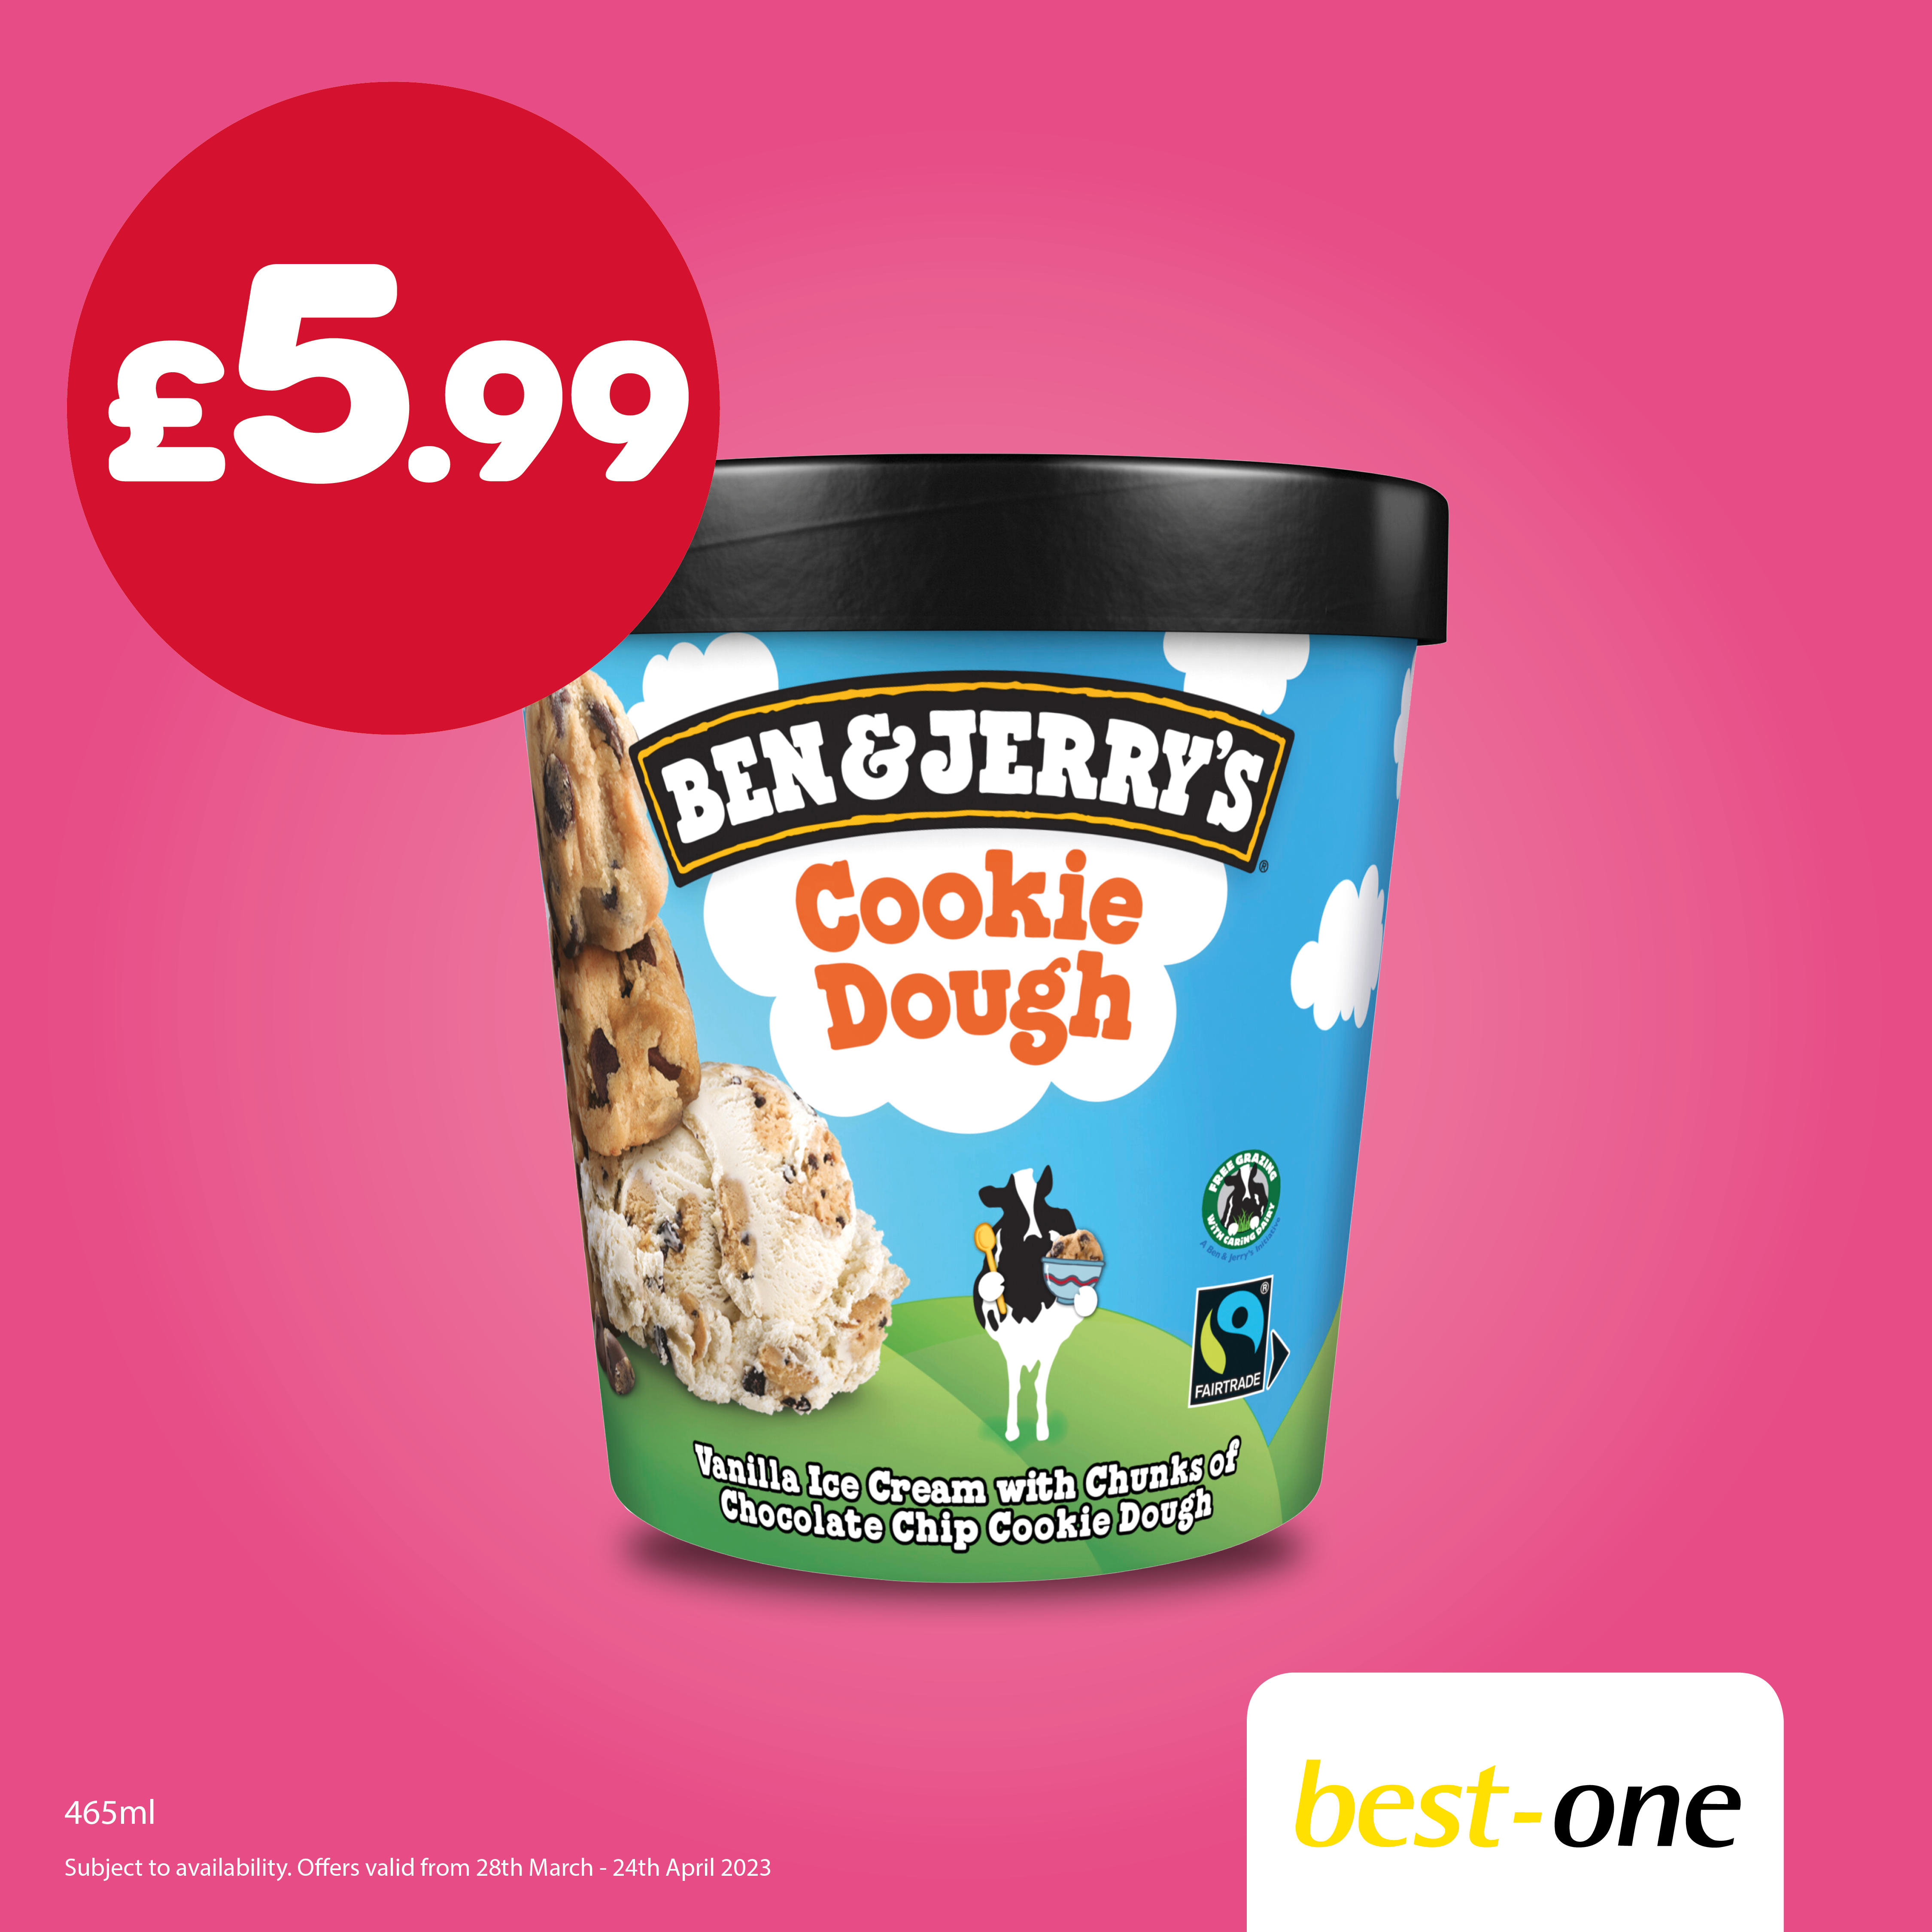 Buy Ben & Jerry's Cookie Dough ice cream 465ml for £5.99 each. Offer available from selected stores  South Hylton Convenience, Best-one Sunderland 020 8453 1234